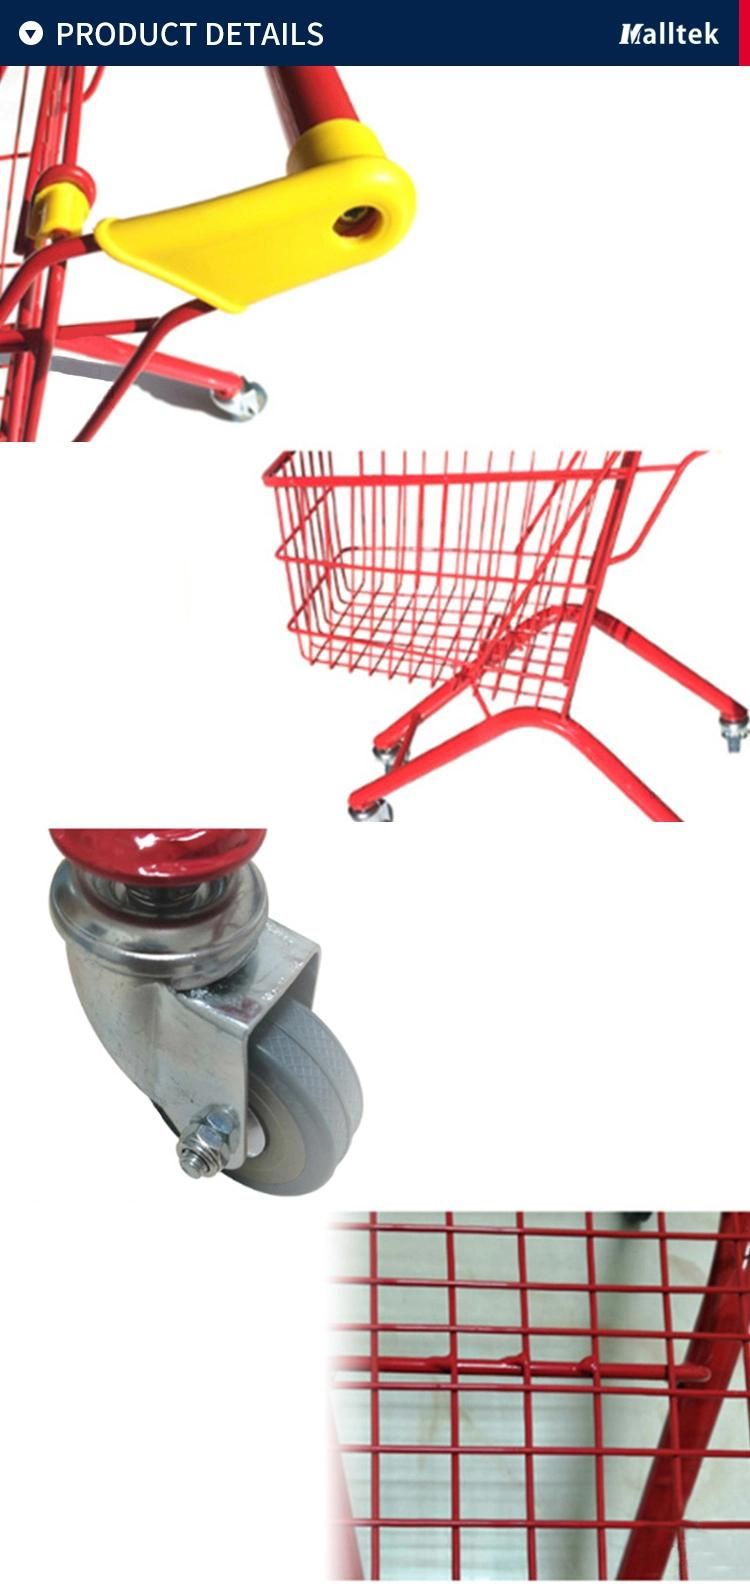 Best Selling Metal Children Retail Grocery Store Trolley for Supermarket